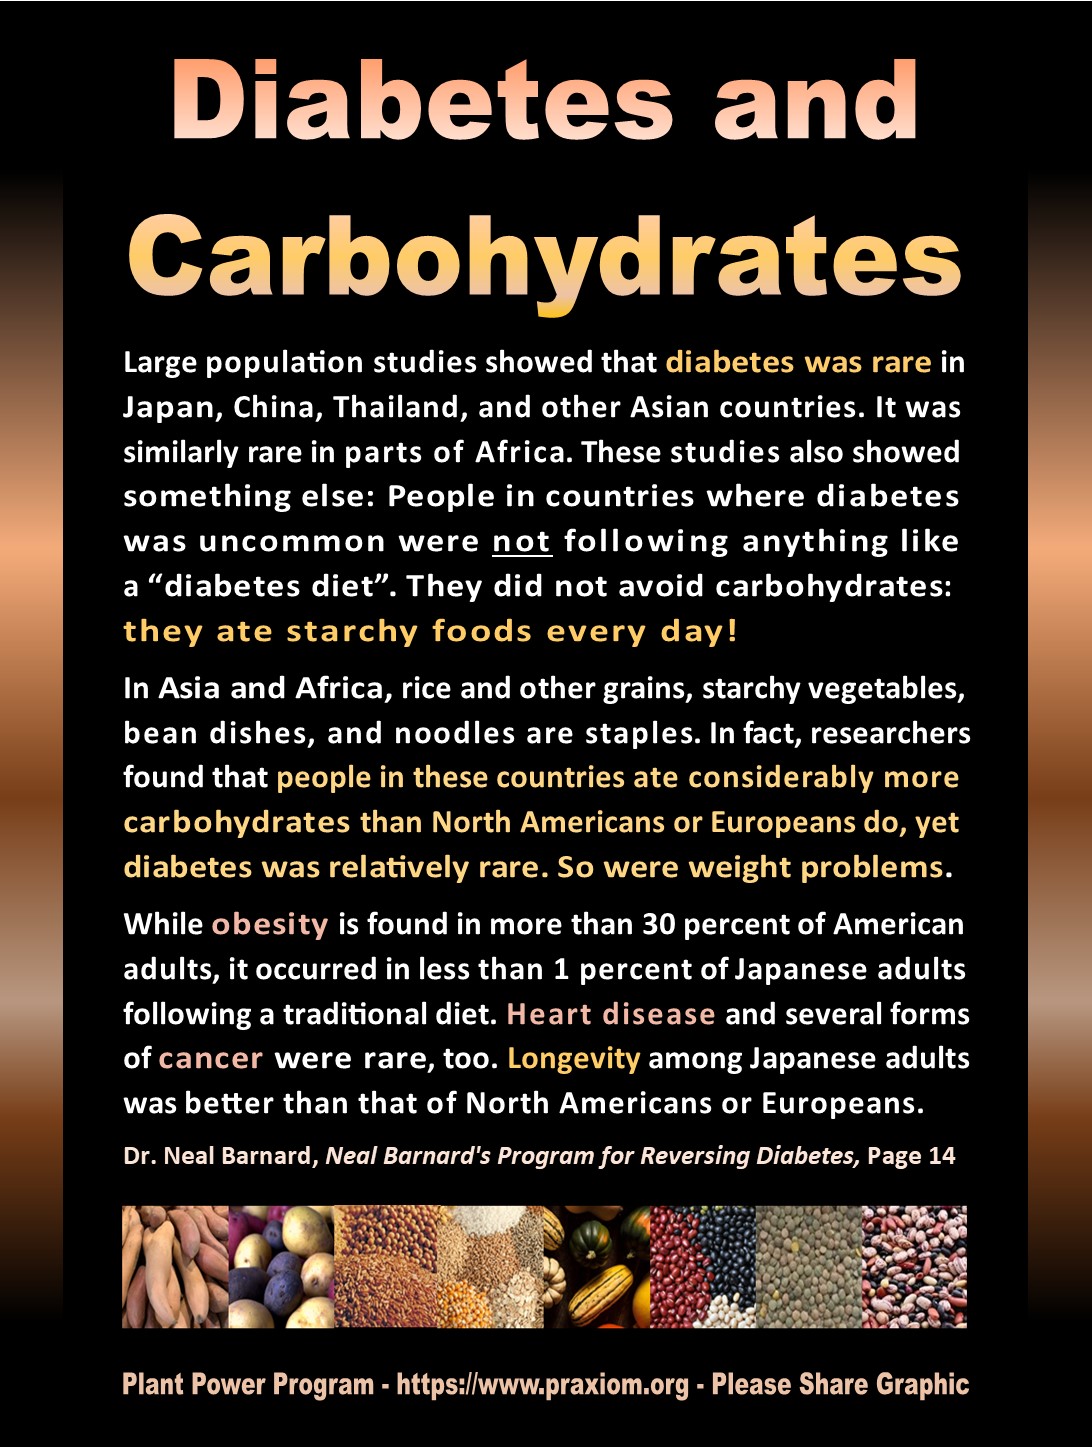 Diabetes and Carbohydrates - Dr. Neal Barnard